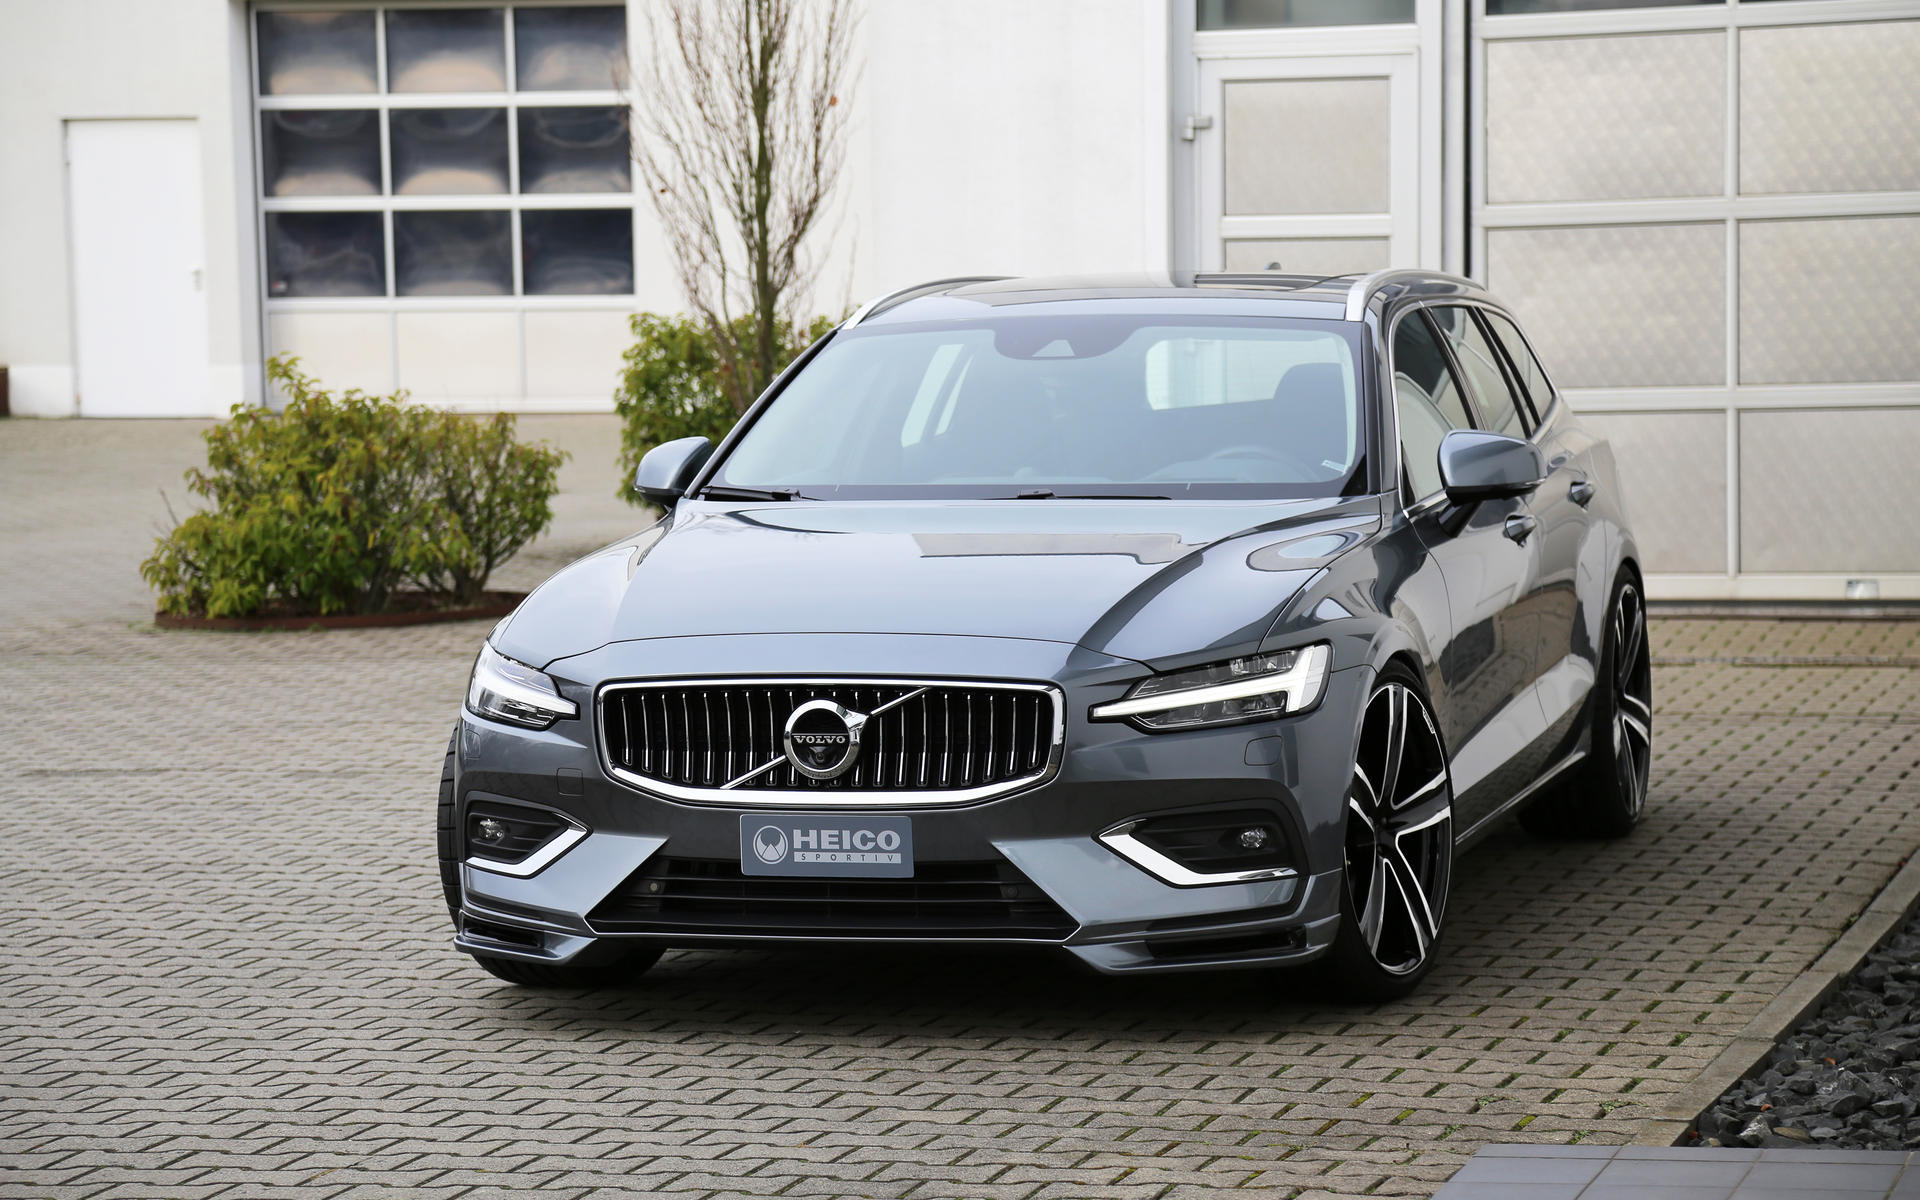 Heico Sportiv Body Kit for Volvo S60 BY new style